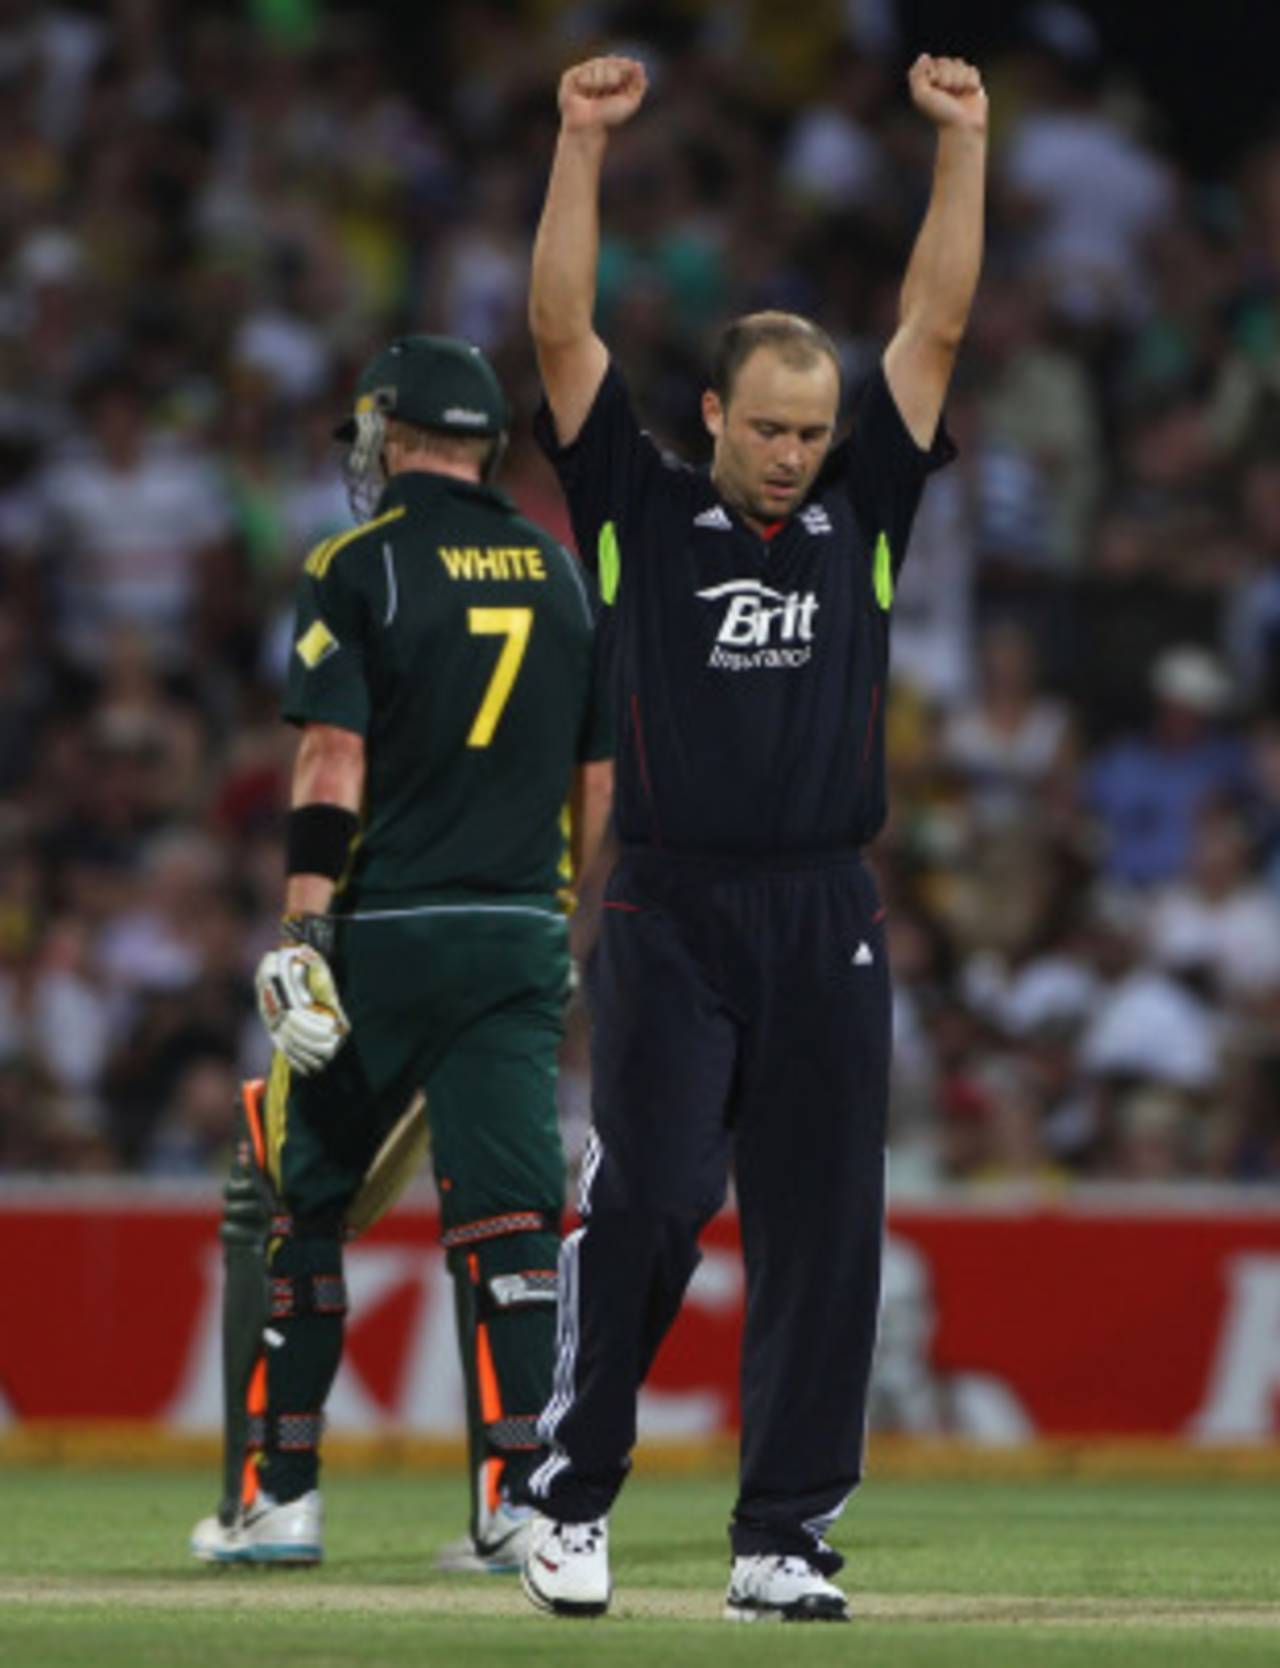 Jonathan Trott claimed 2 for 31 in seven overs, his maiden ODI wickets, Australia v England, 4th ODI, Adelaide, January 26, 2011